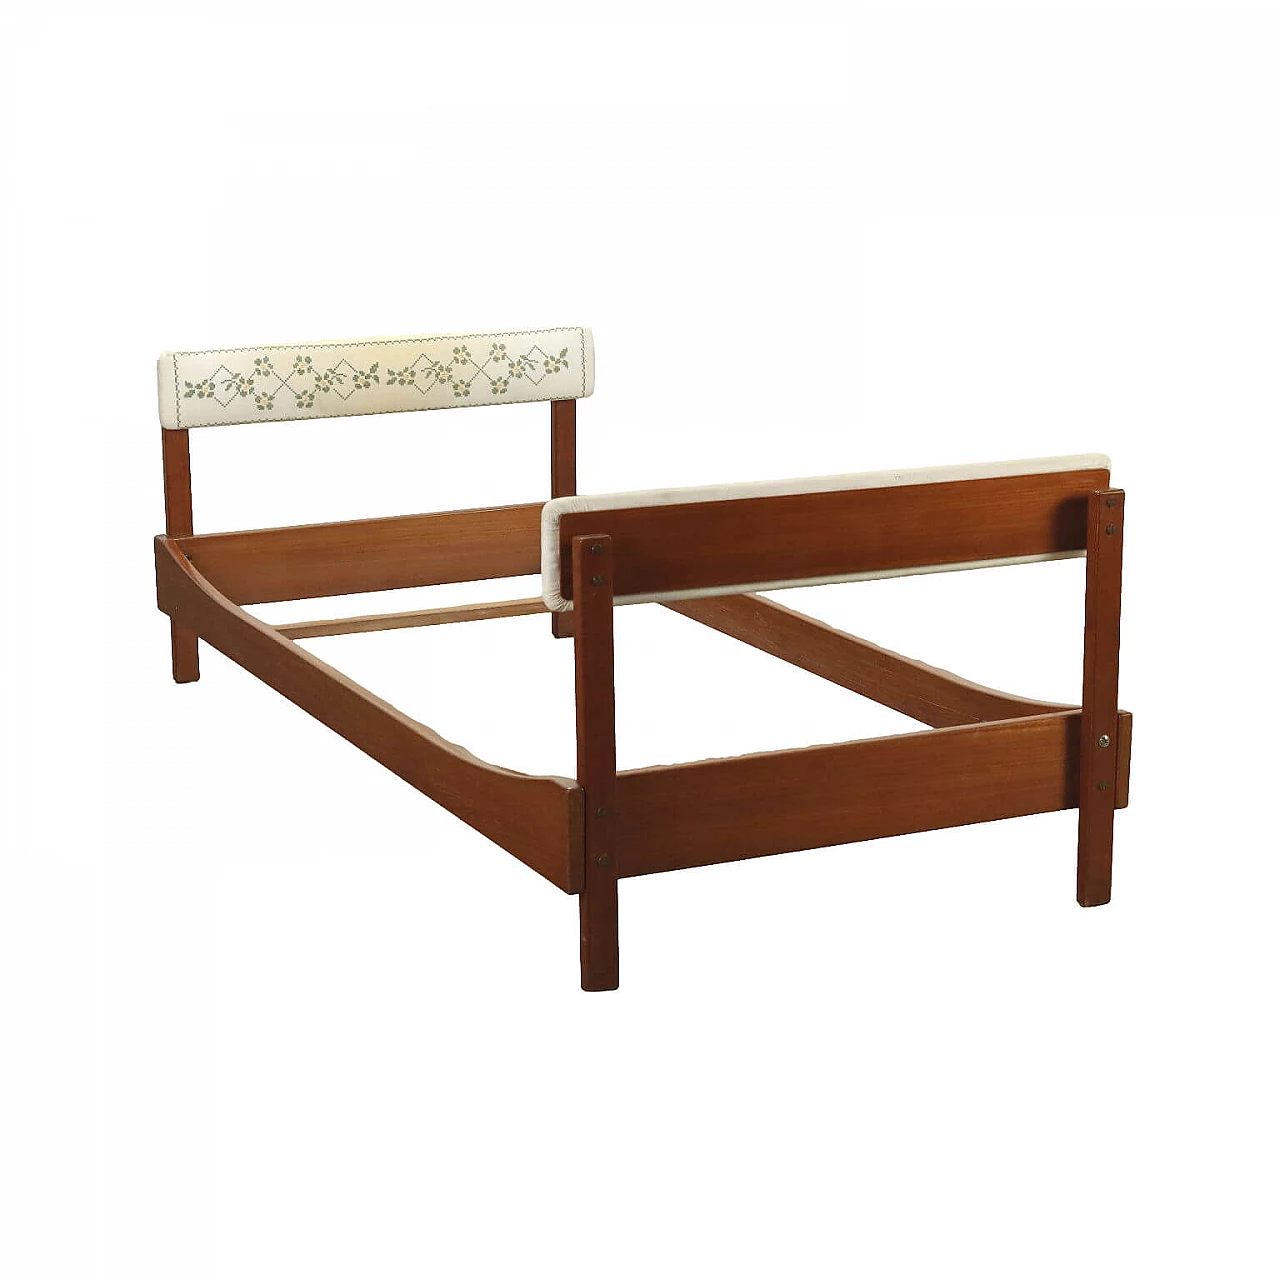 Teak single bed with upholstered headboard and footboard covered in fabric, 1960s 1